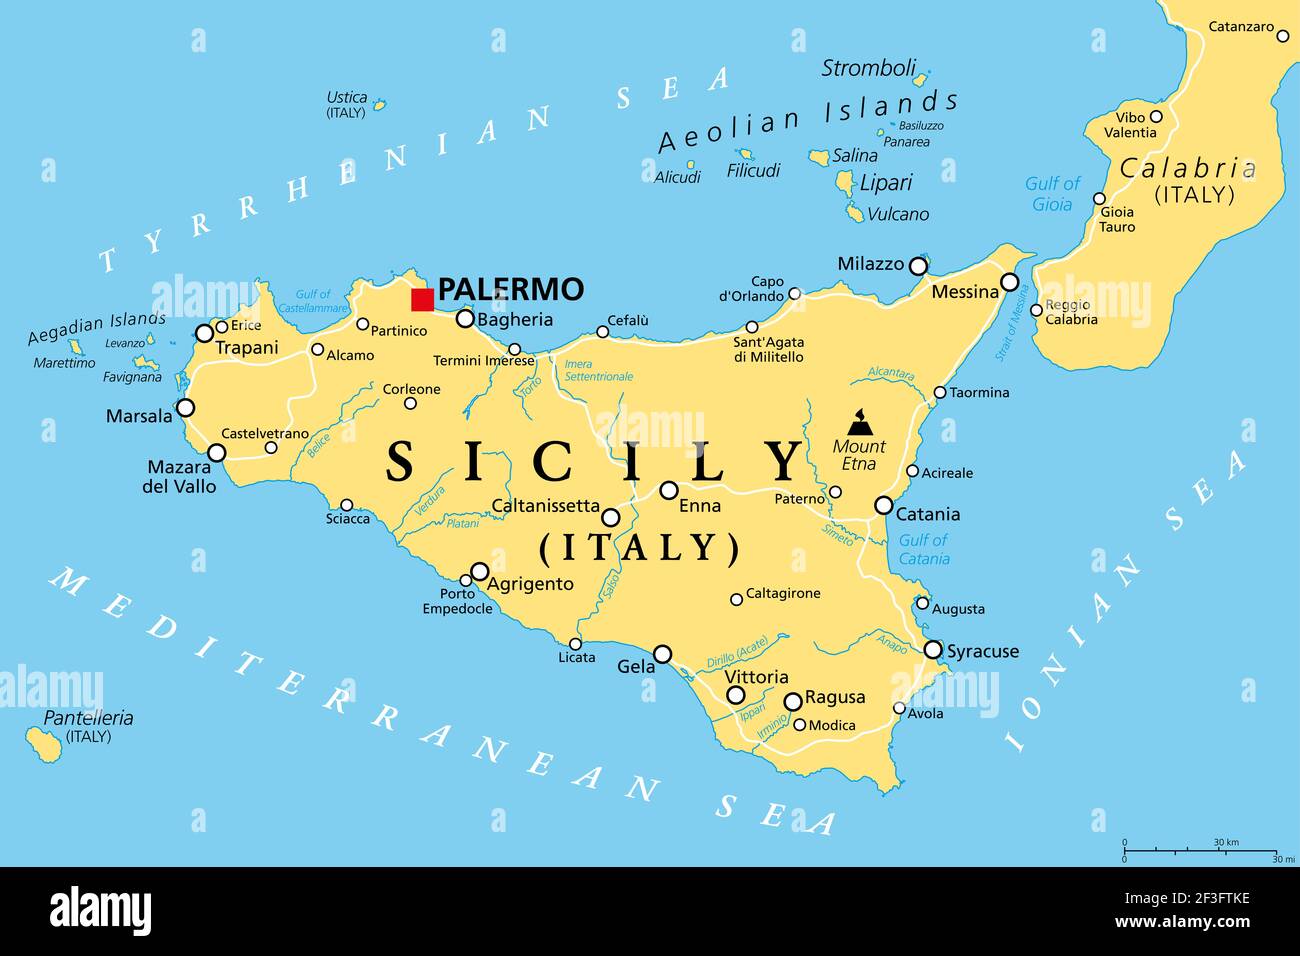 Sicily, autonomous region of Italy, political map, with capital Palermo, Aeolian and Aegadian Islands, volcano Etna, and important cities. Stock Photo